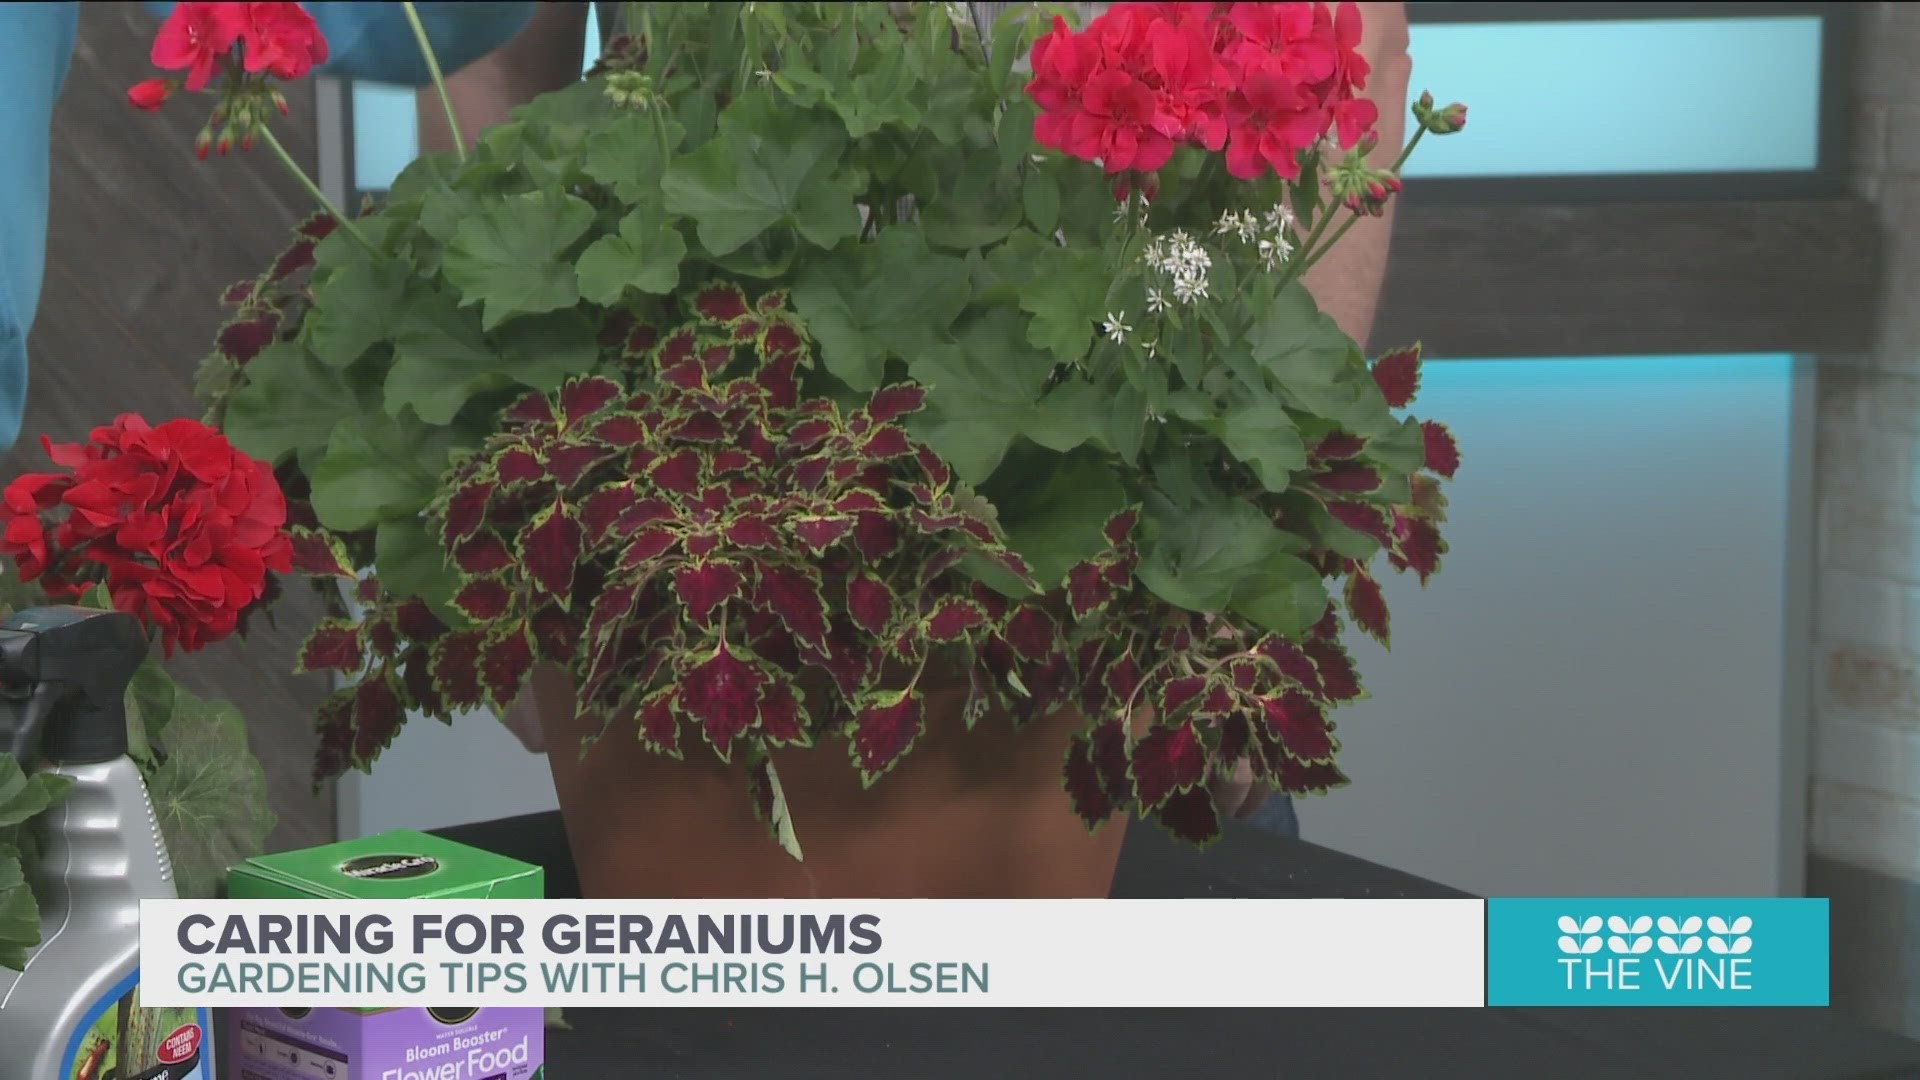 Chris H. Olsen is here telling us how to take care of geraniums this spring.